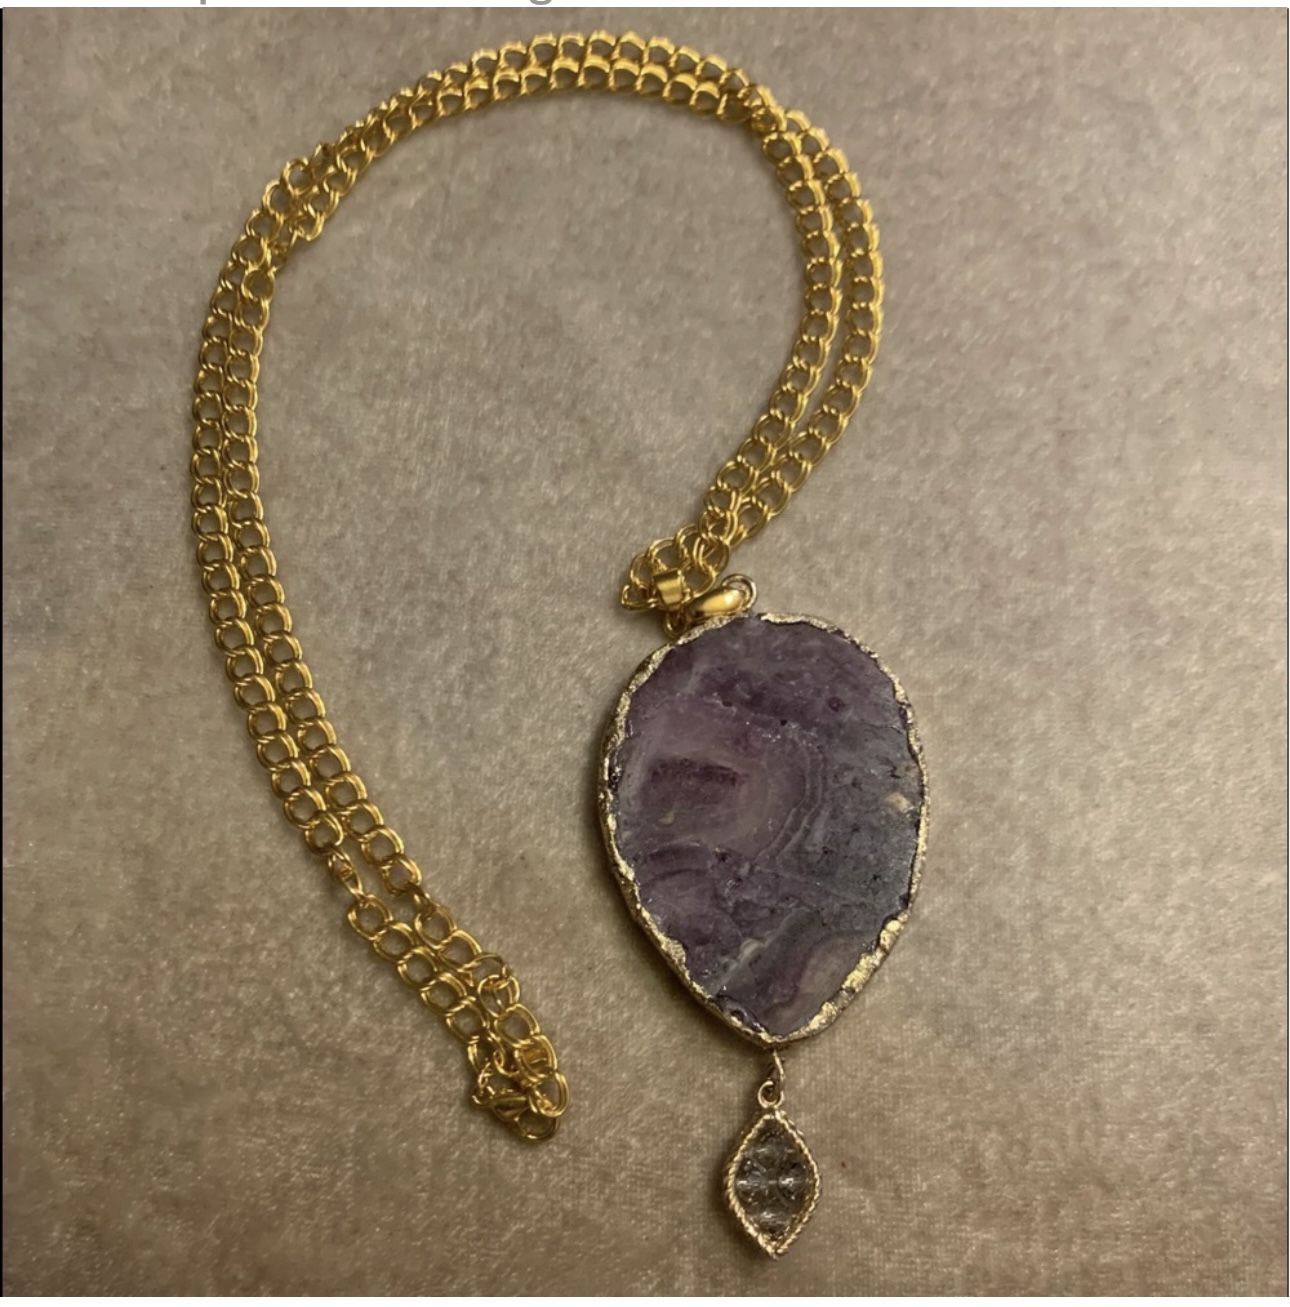 Large, Sliced Amethyst, Stone Pendant With A Gold Plated Chain Necklace